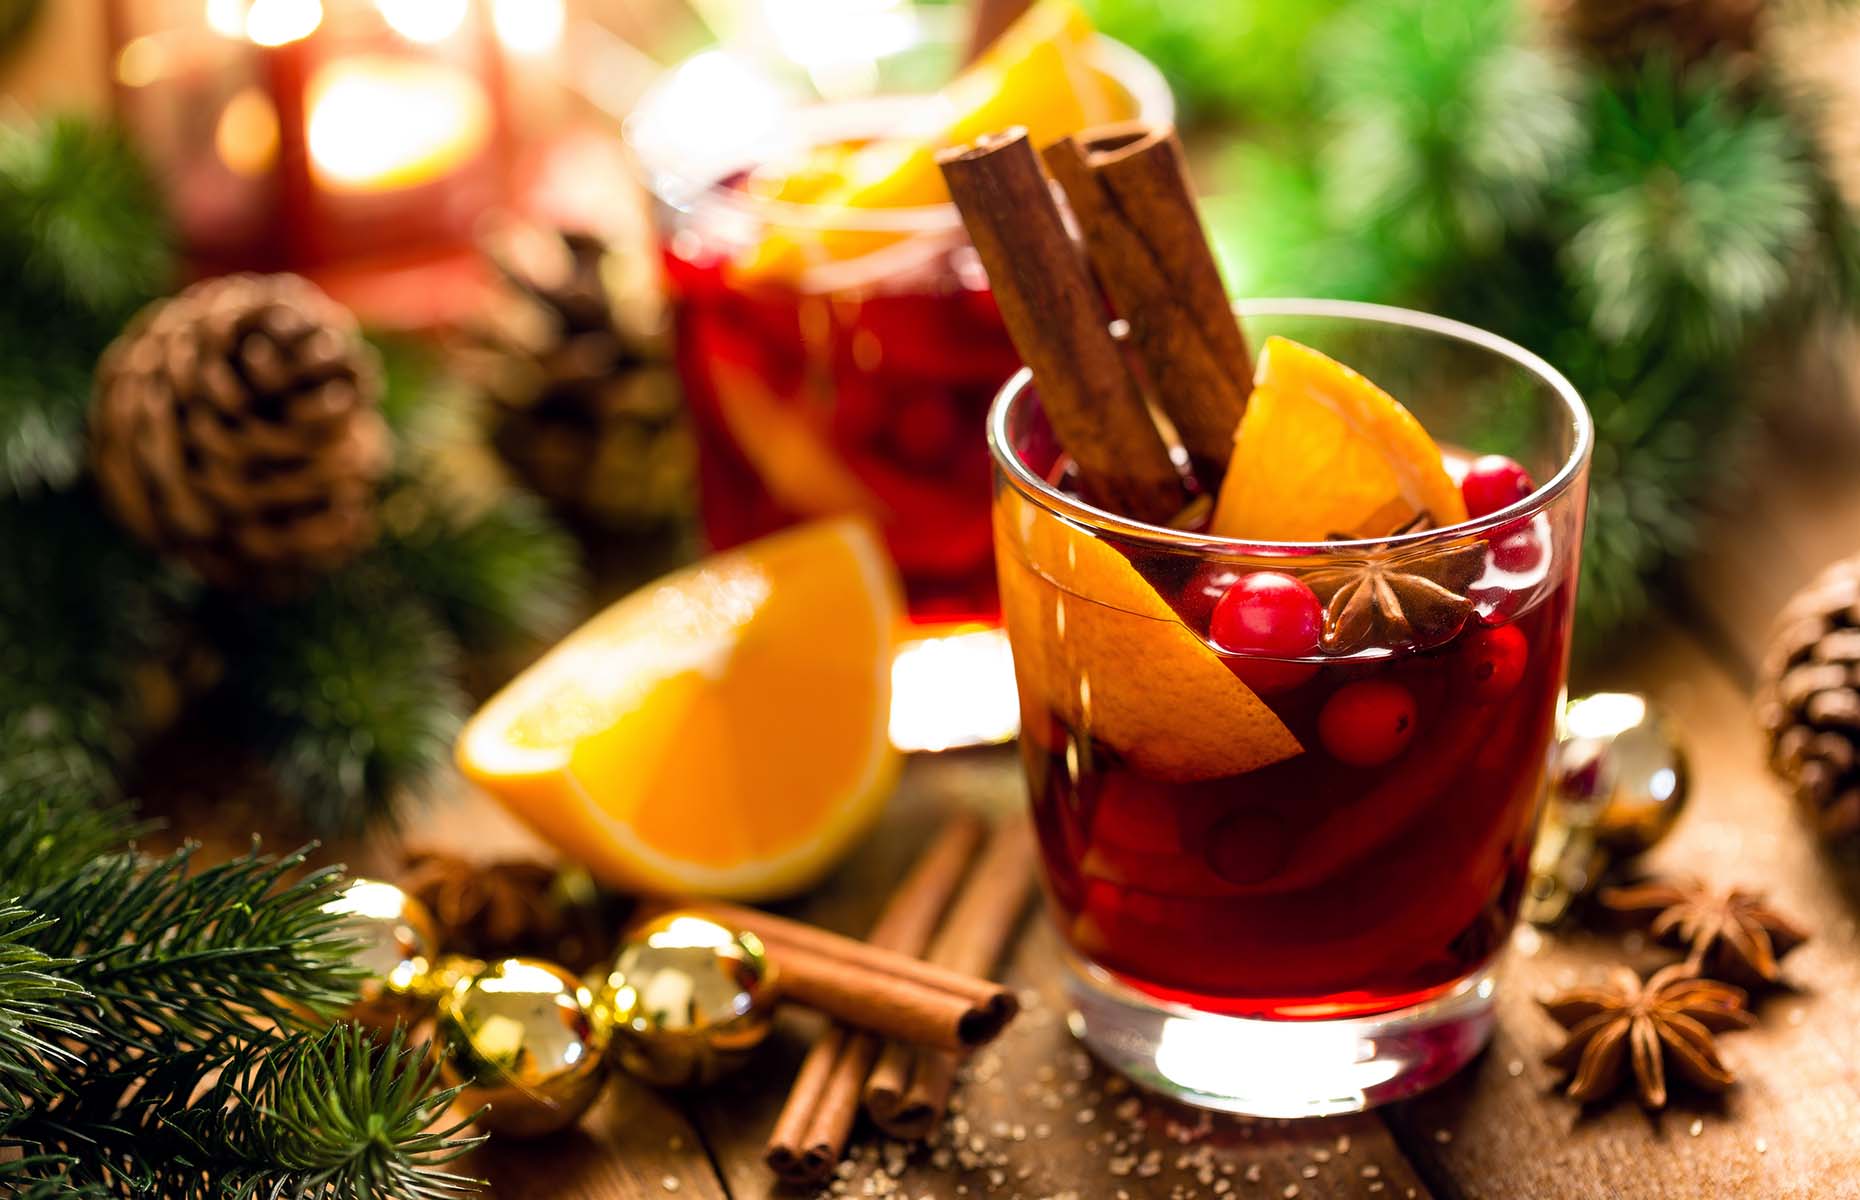 Homemade mulled wine in a glass (Image: Sea Wave/Shutterstock)